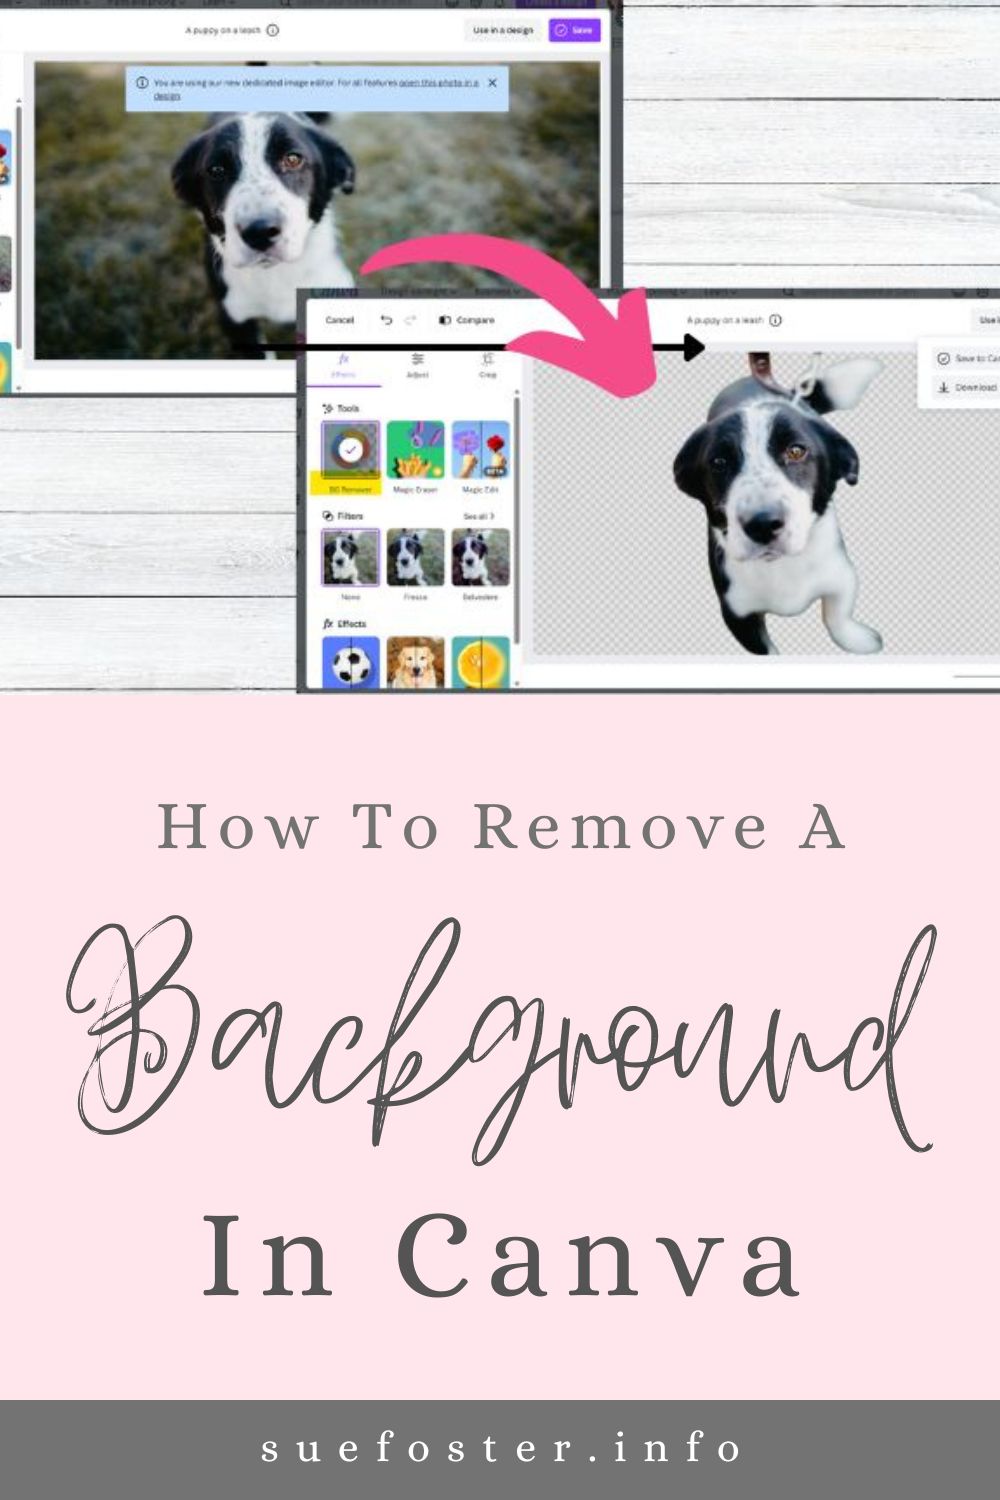 Discover how to remove image backgrounds using Canva with my easy-to-follow guide that's perfect for beginners.